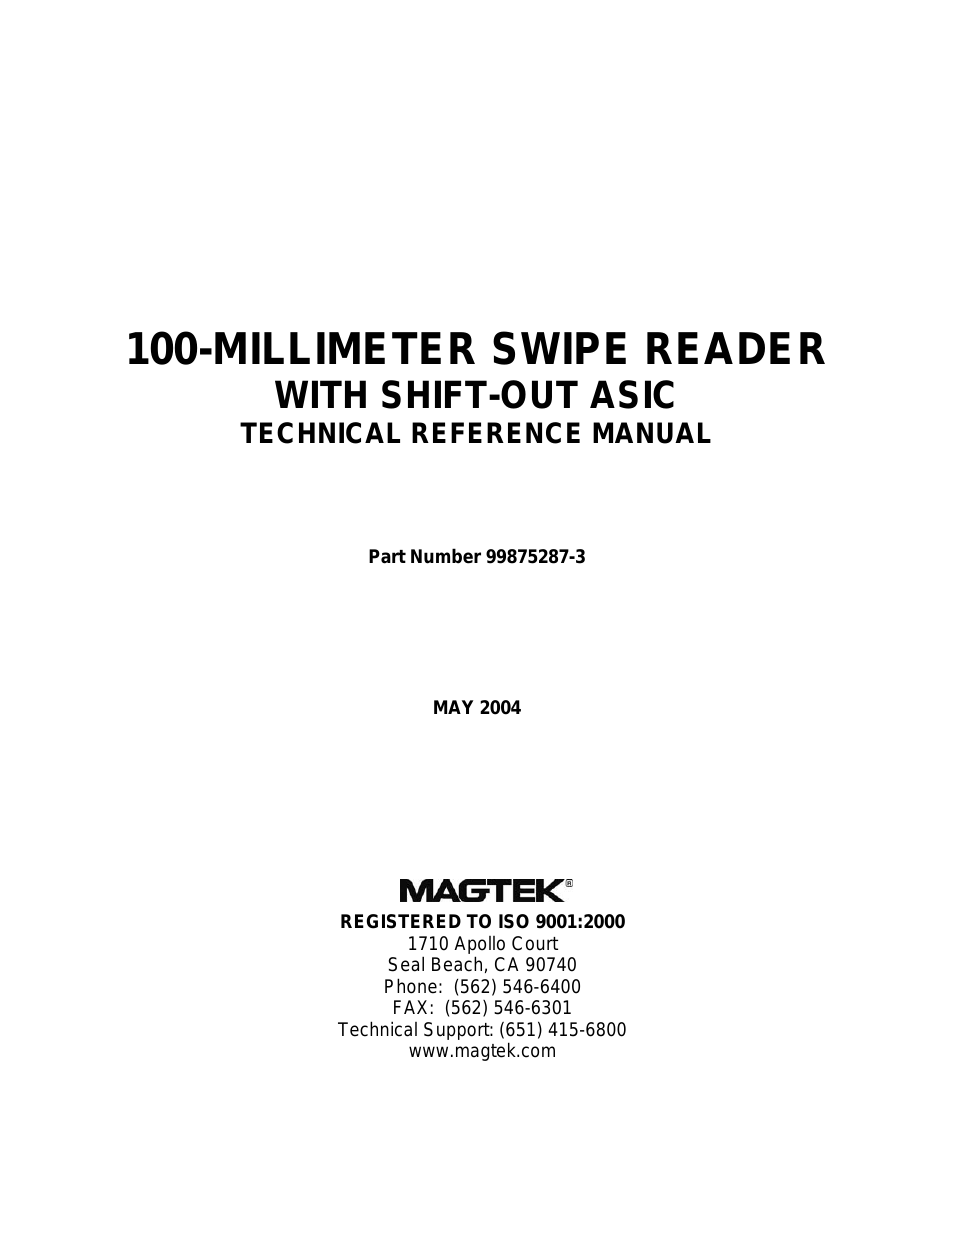 100-MILLIMETER SWIPE READER WITH SHIFT-OUT ASIC